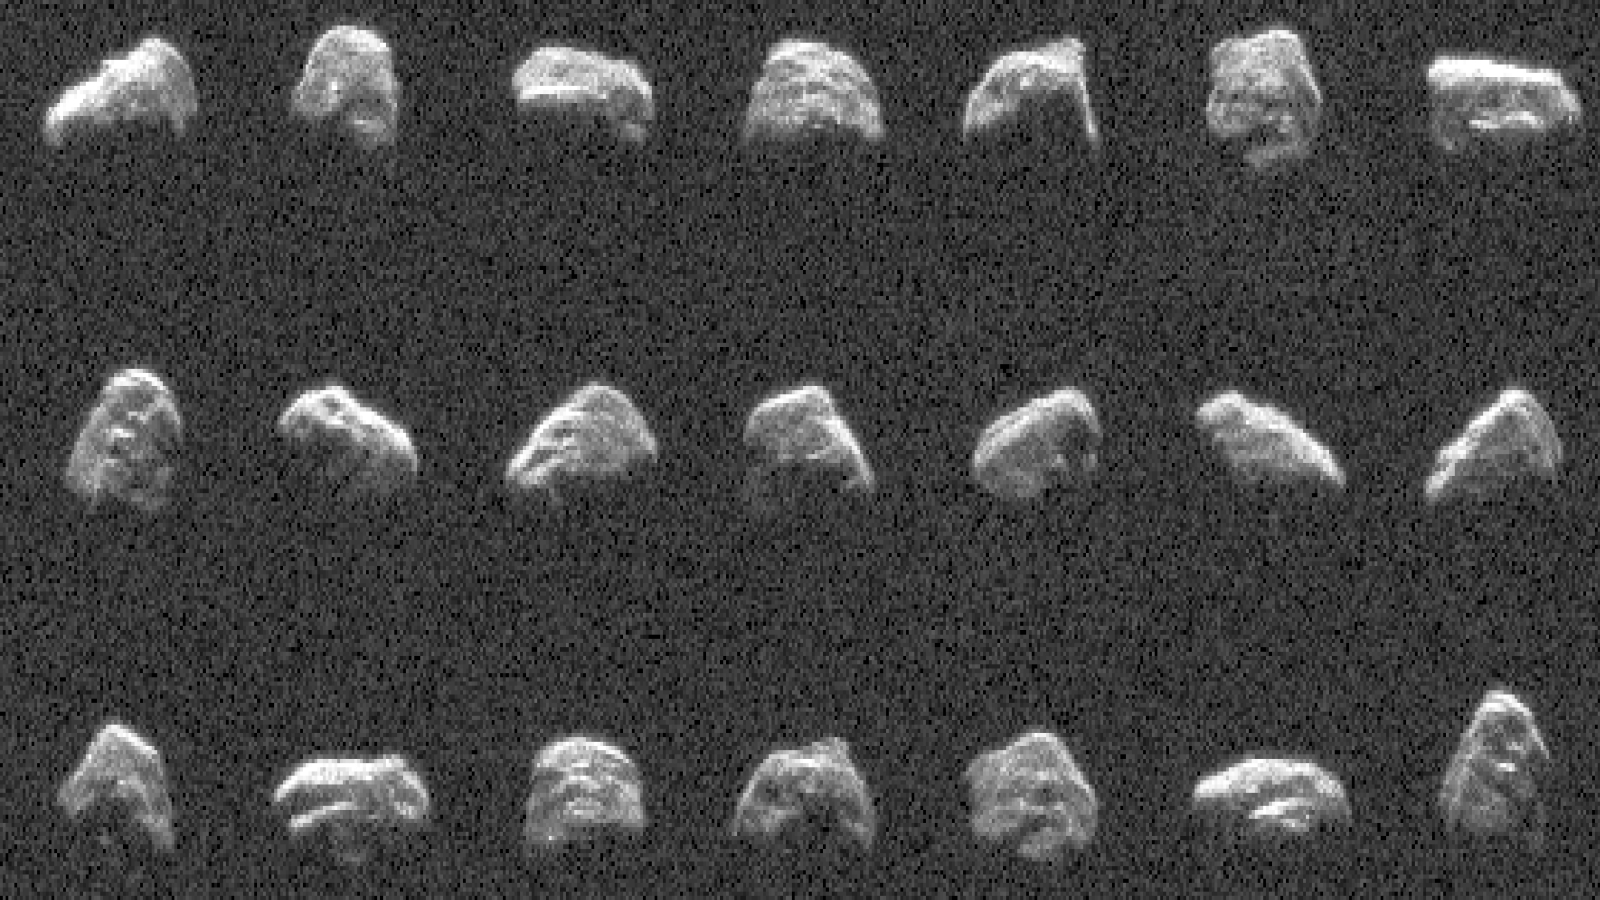  Earth's gravity knocked pyramid-size asteroid off course during recent ultra-close flyby, NASA images reveal 